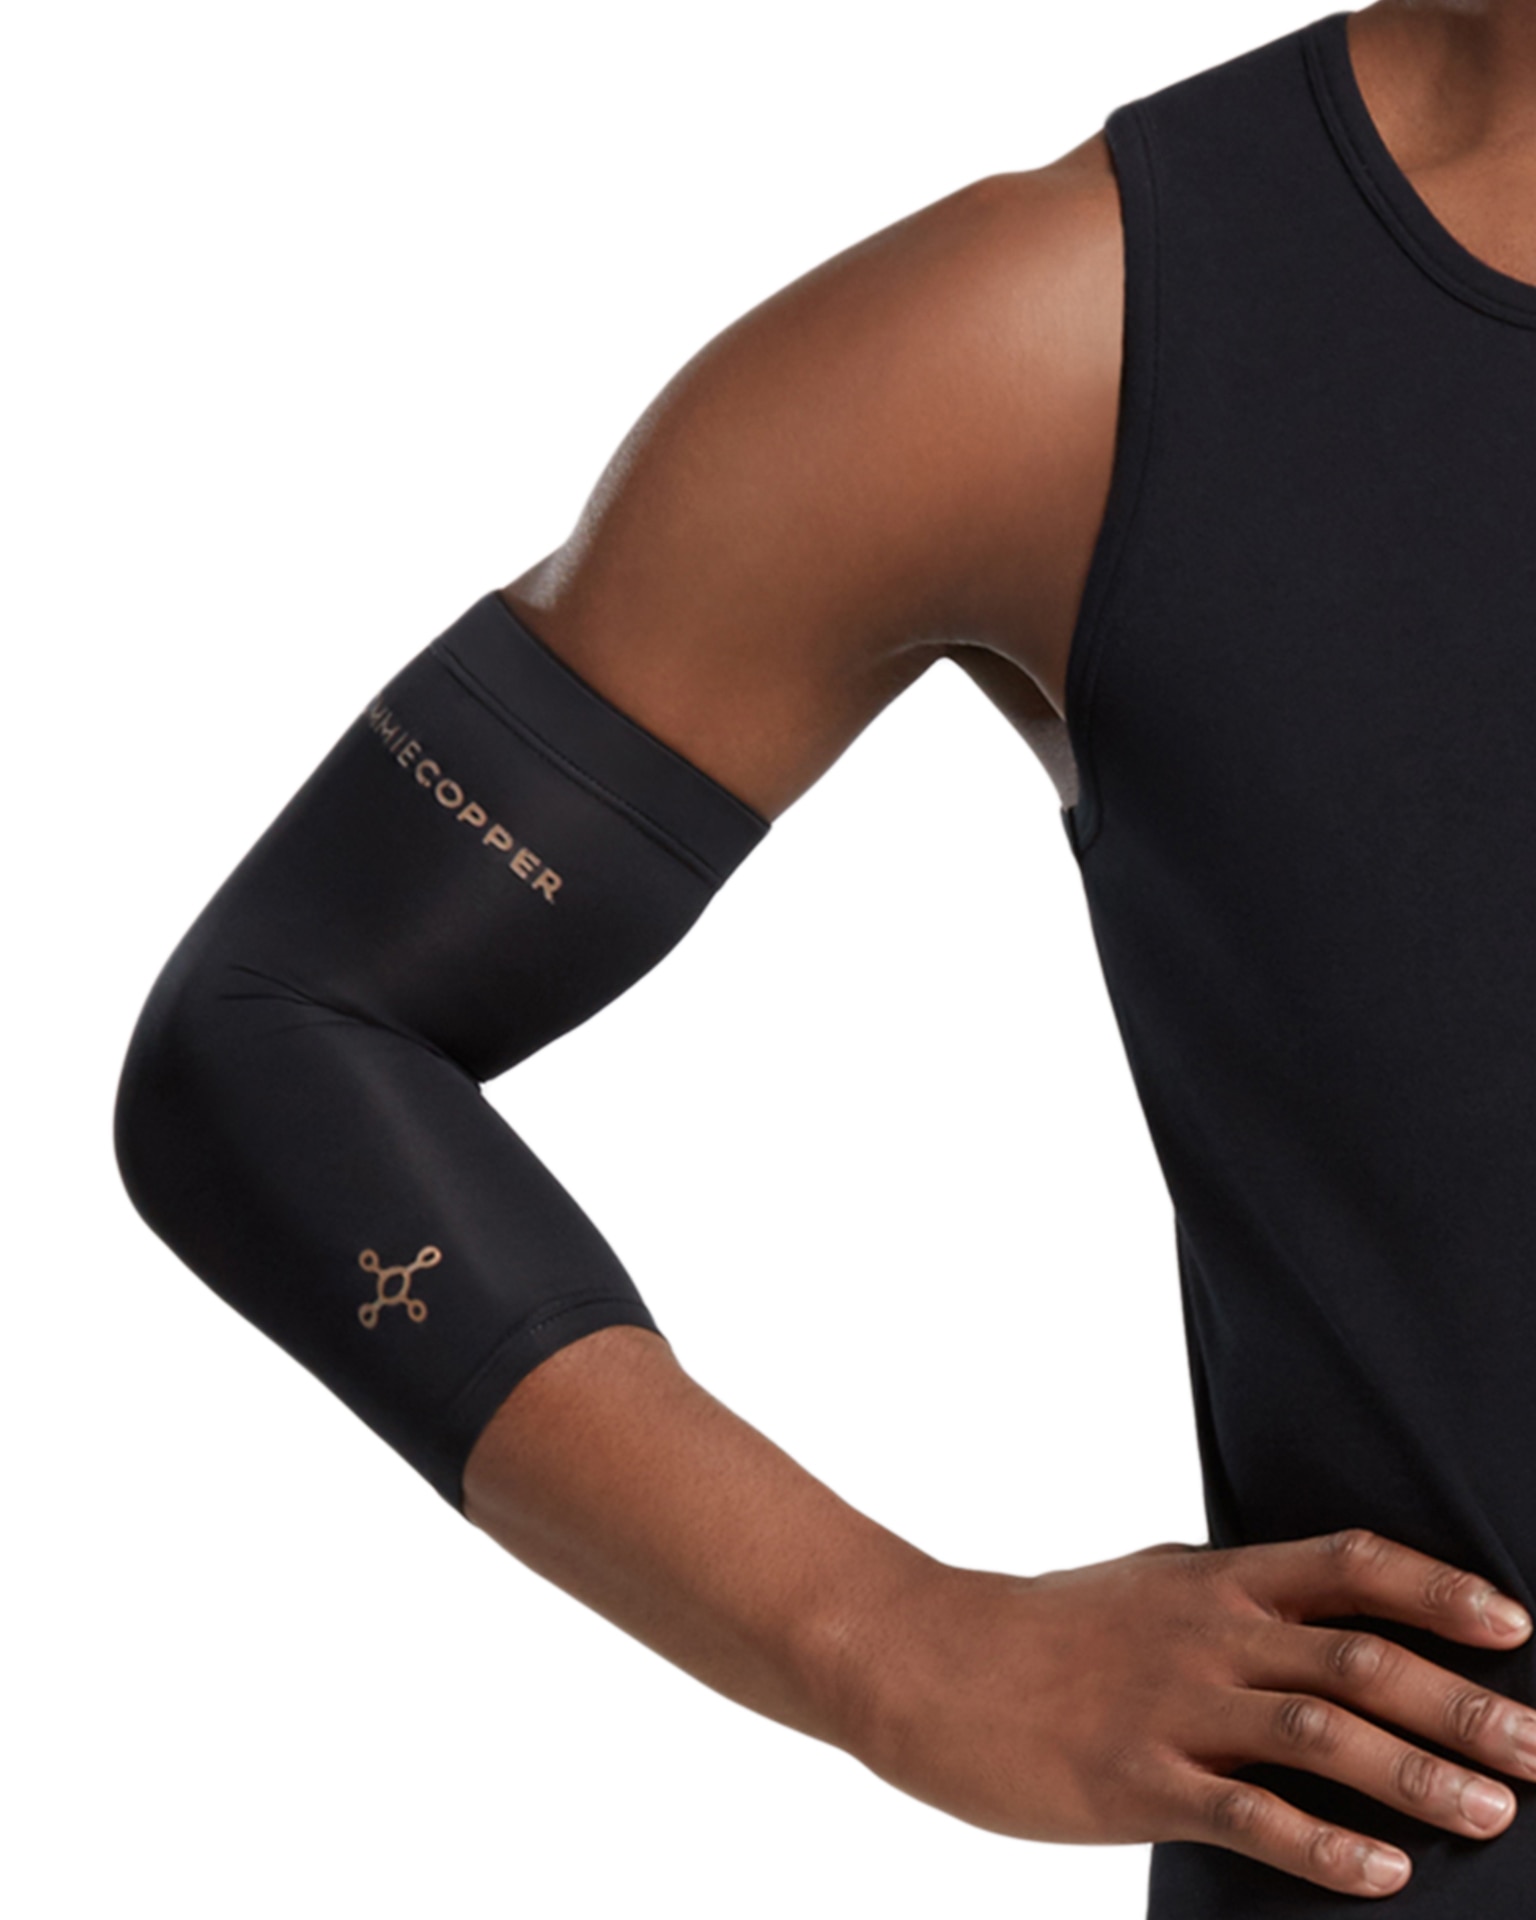 copper compression sleeve for elbow